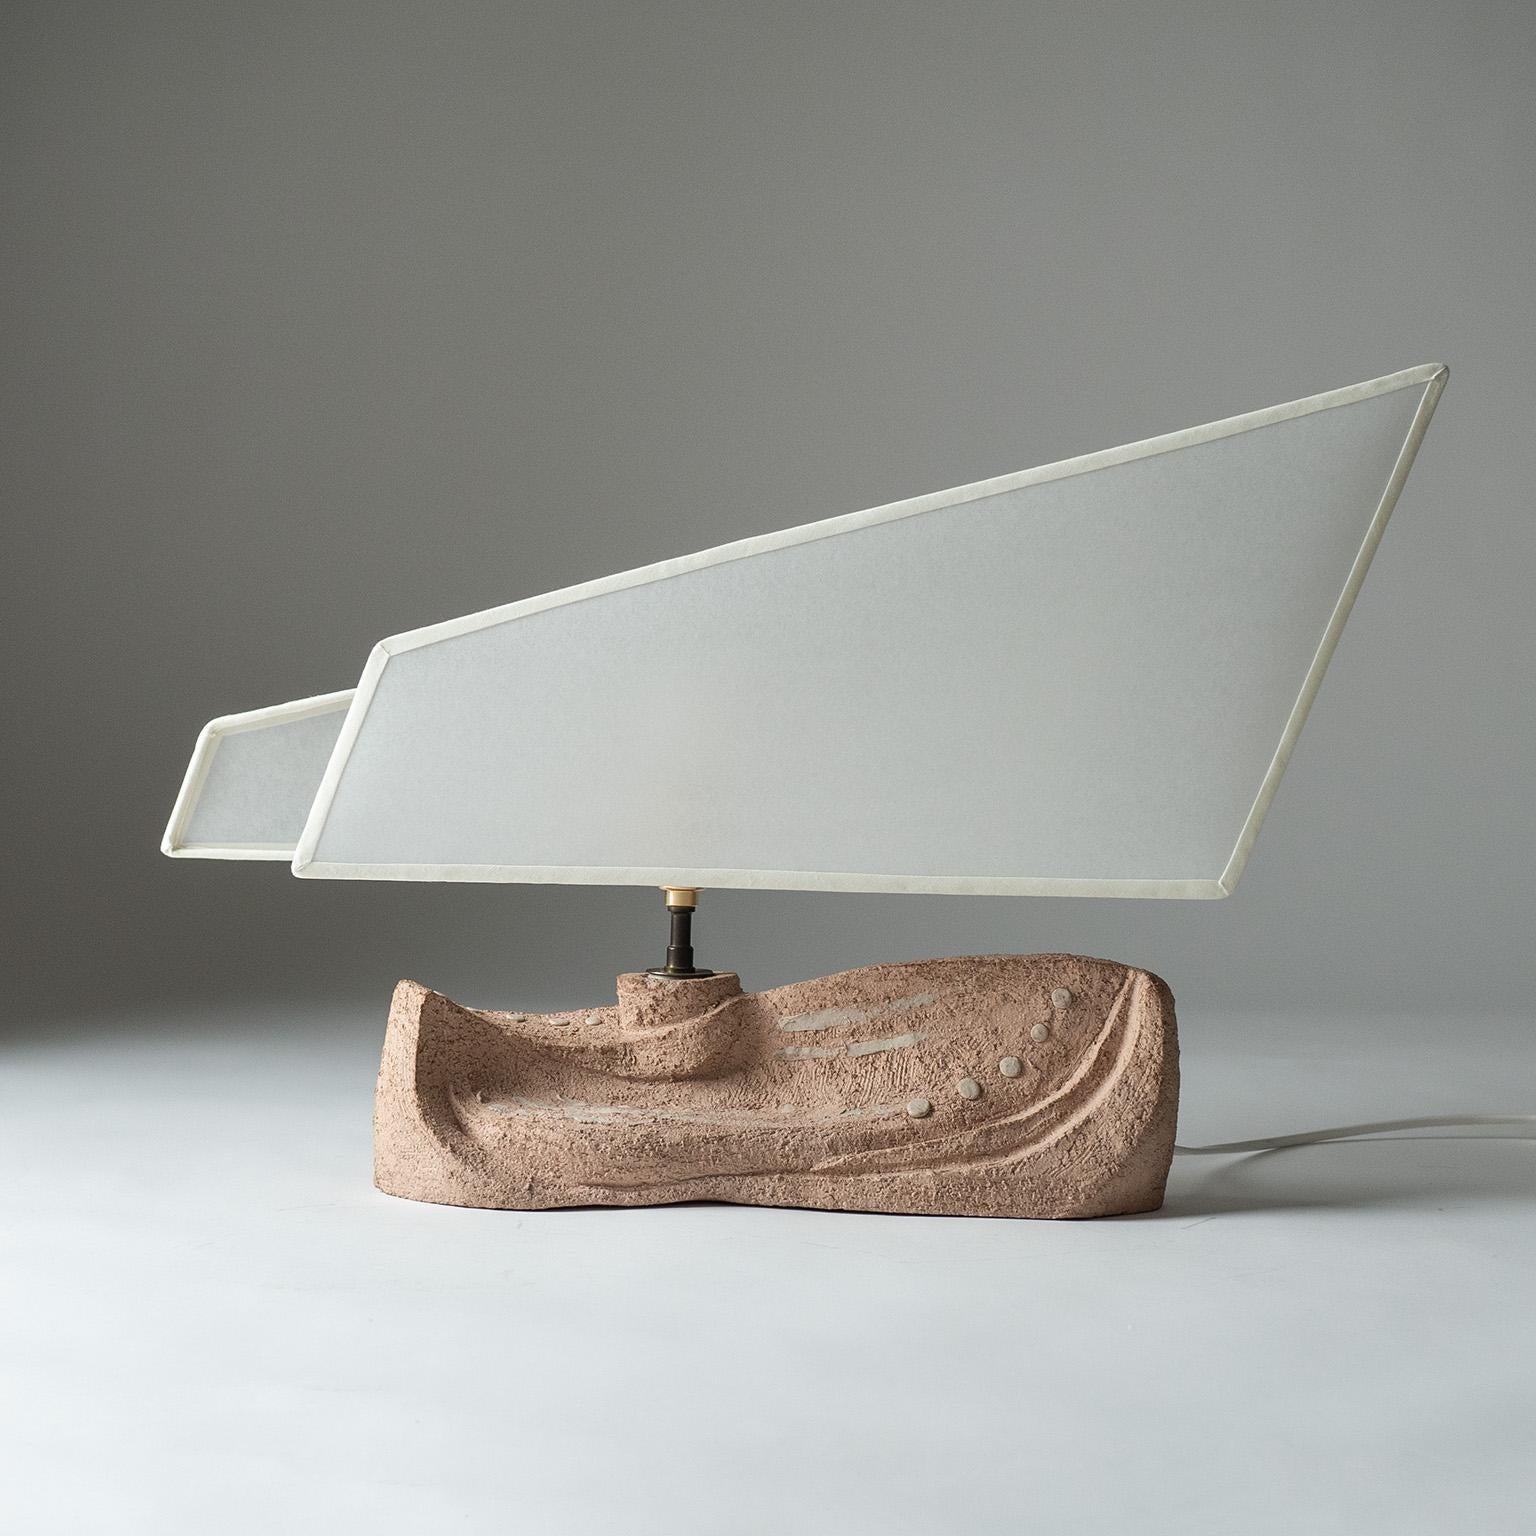 French ceramic table lamp from the 1970s. The abstracted boat-like design has a sculpted chamotte base with a parchment paper shade in the shape of a sail. One brass E14 socket with new wiring.
Measures: Height 39cm (15″), Width 60cm (23.5″), Depth